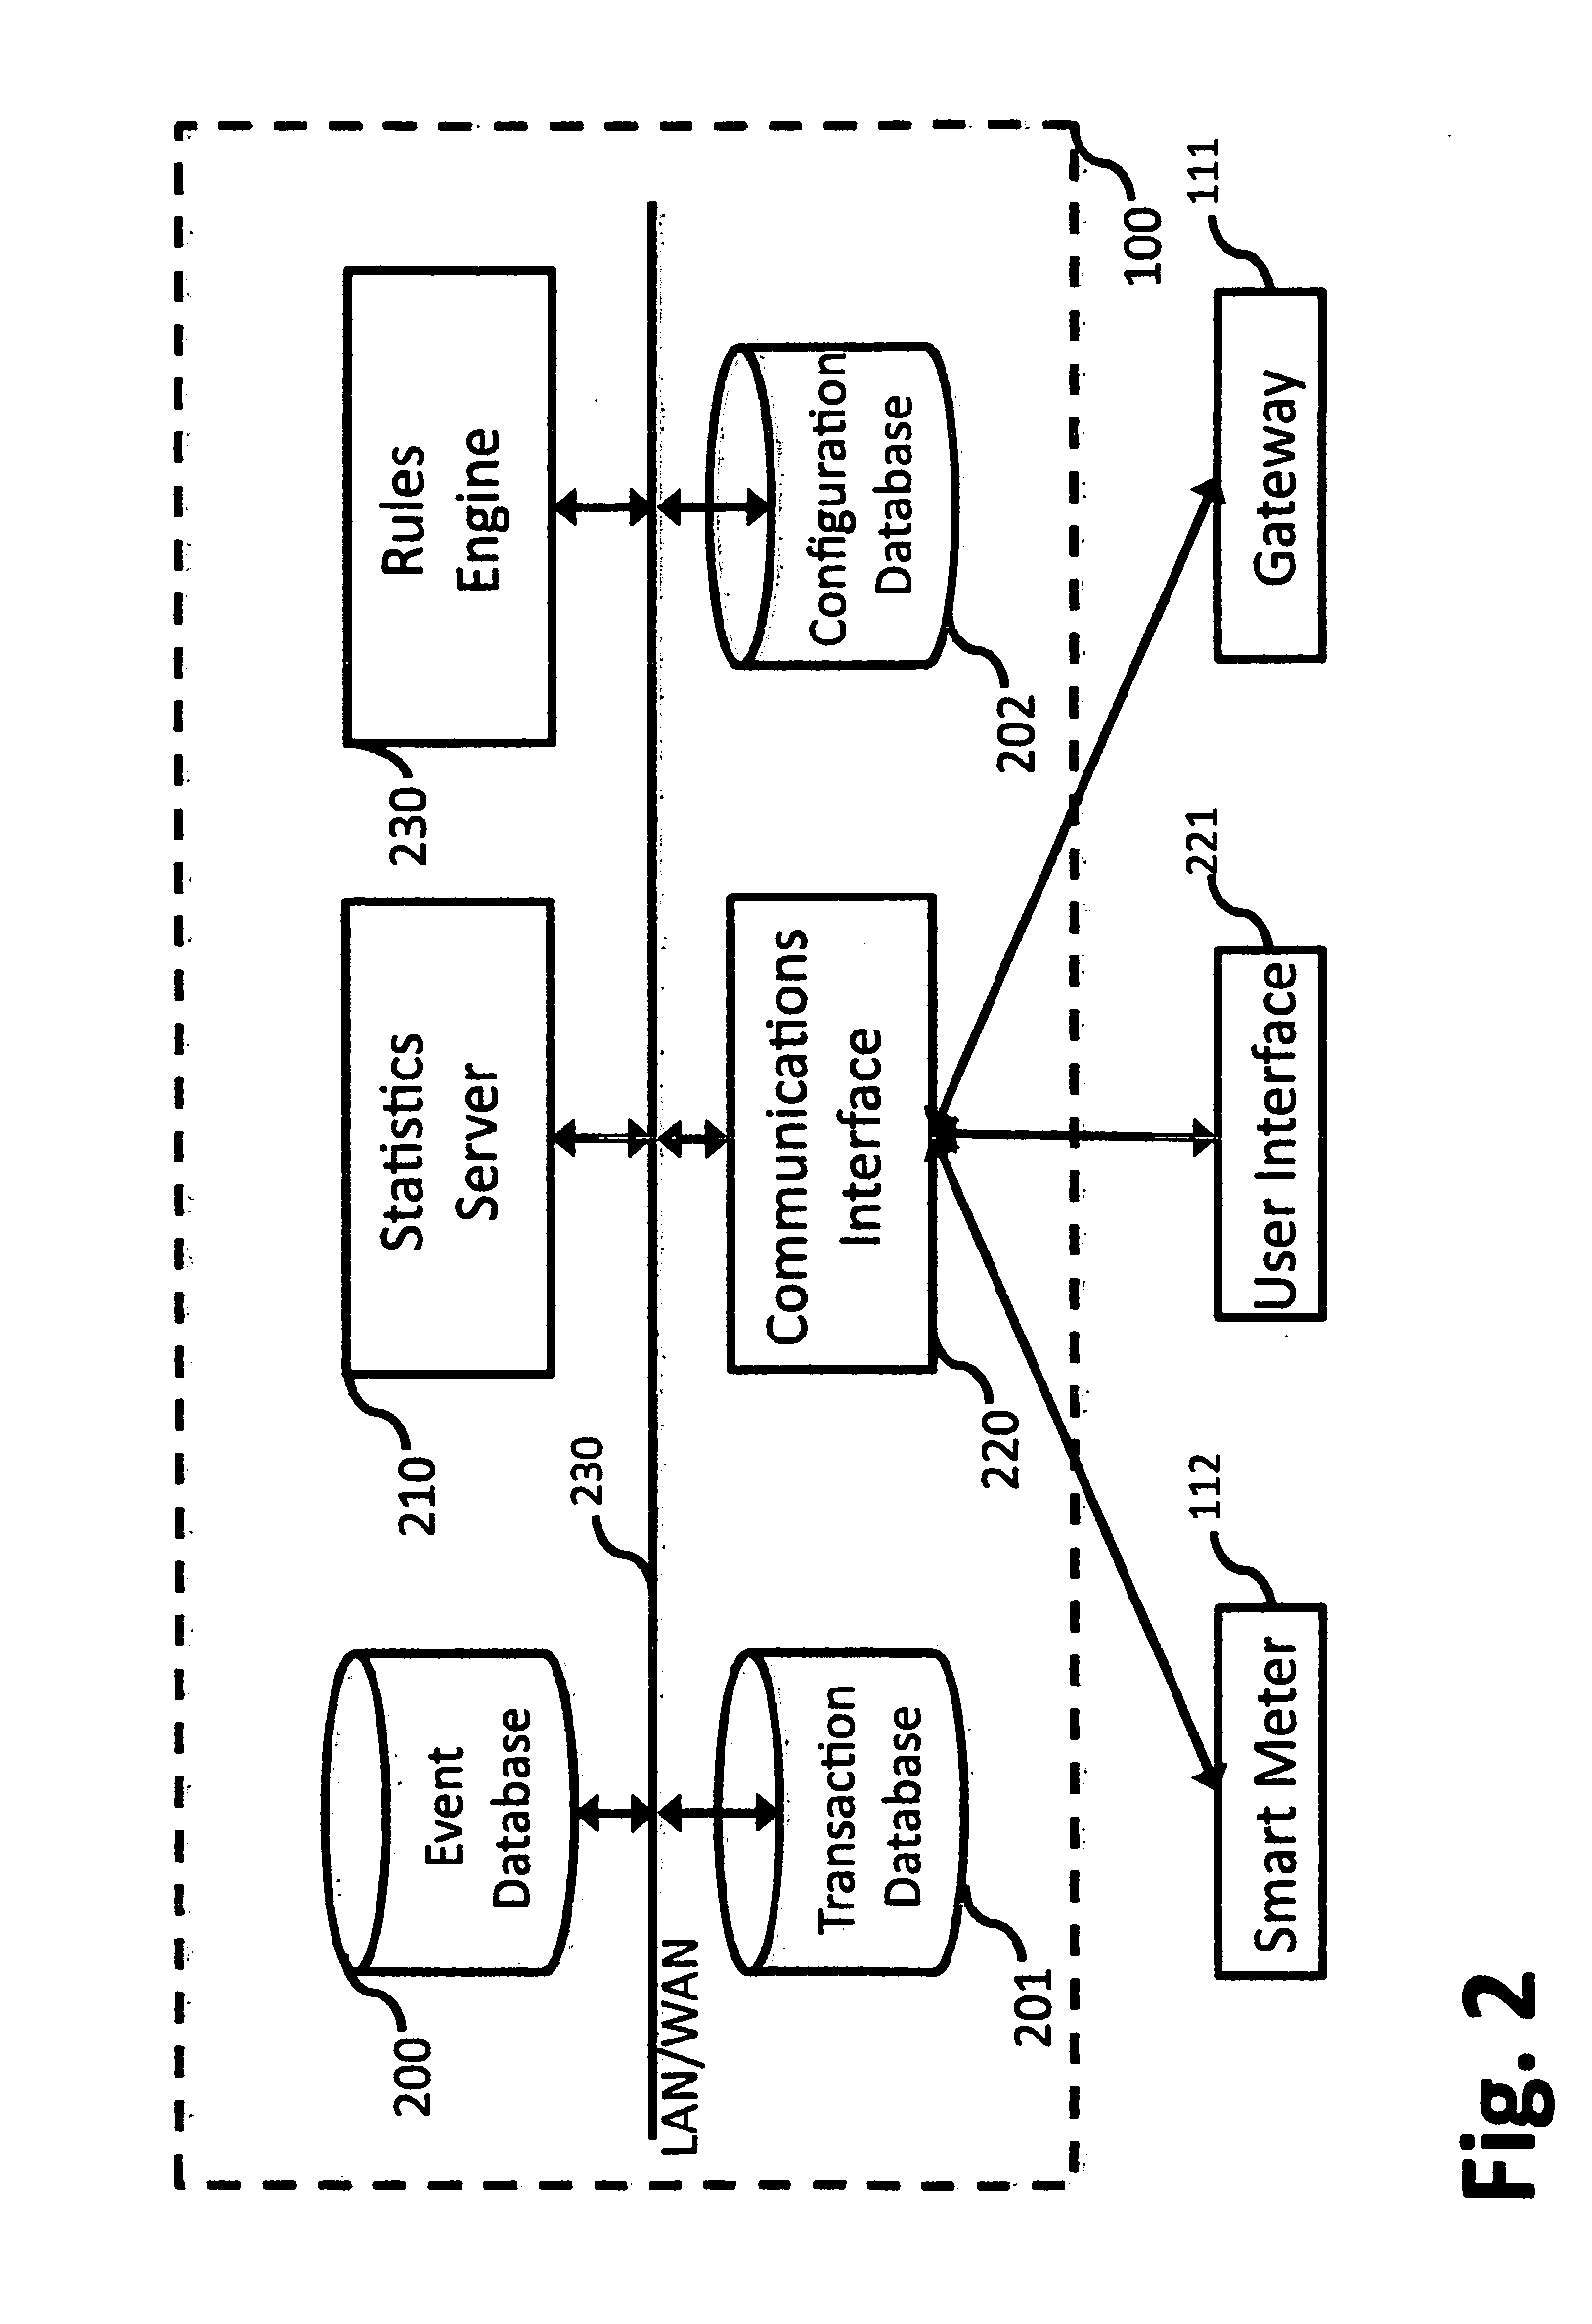 System and method for managing energy